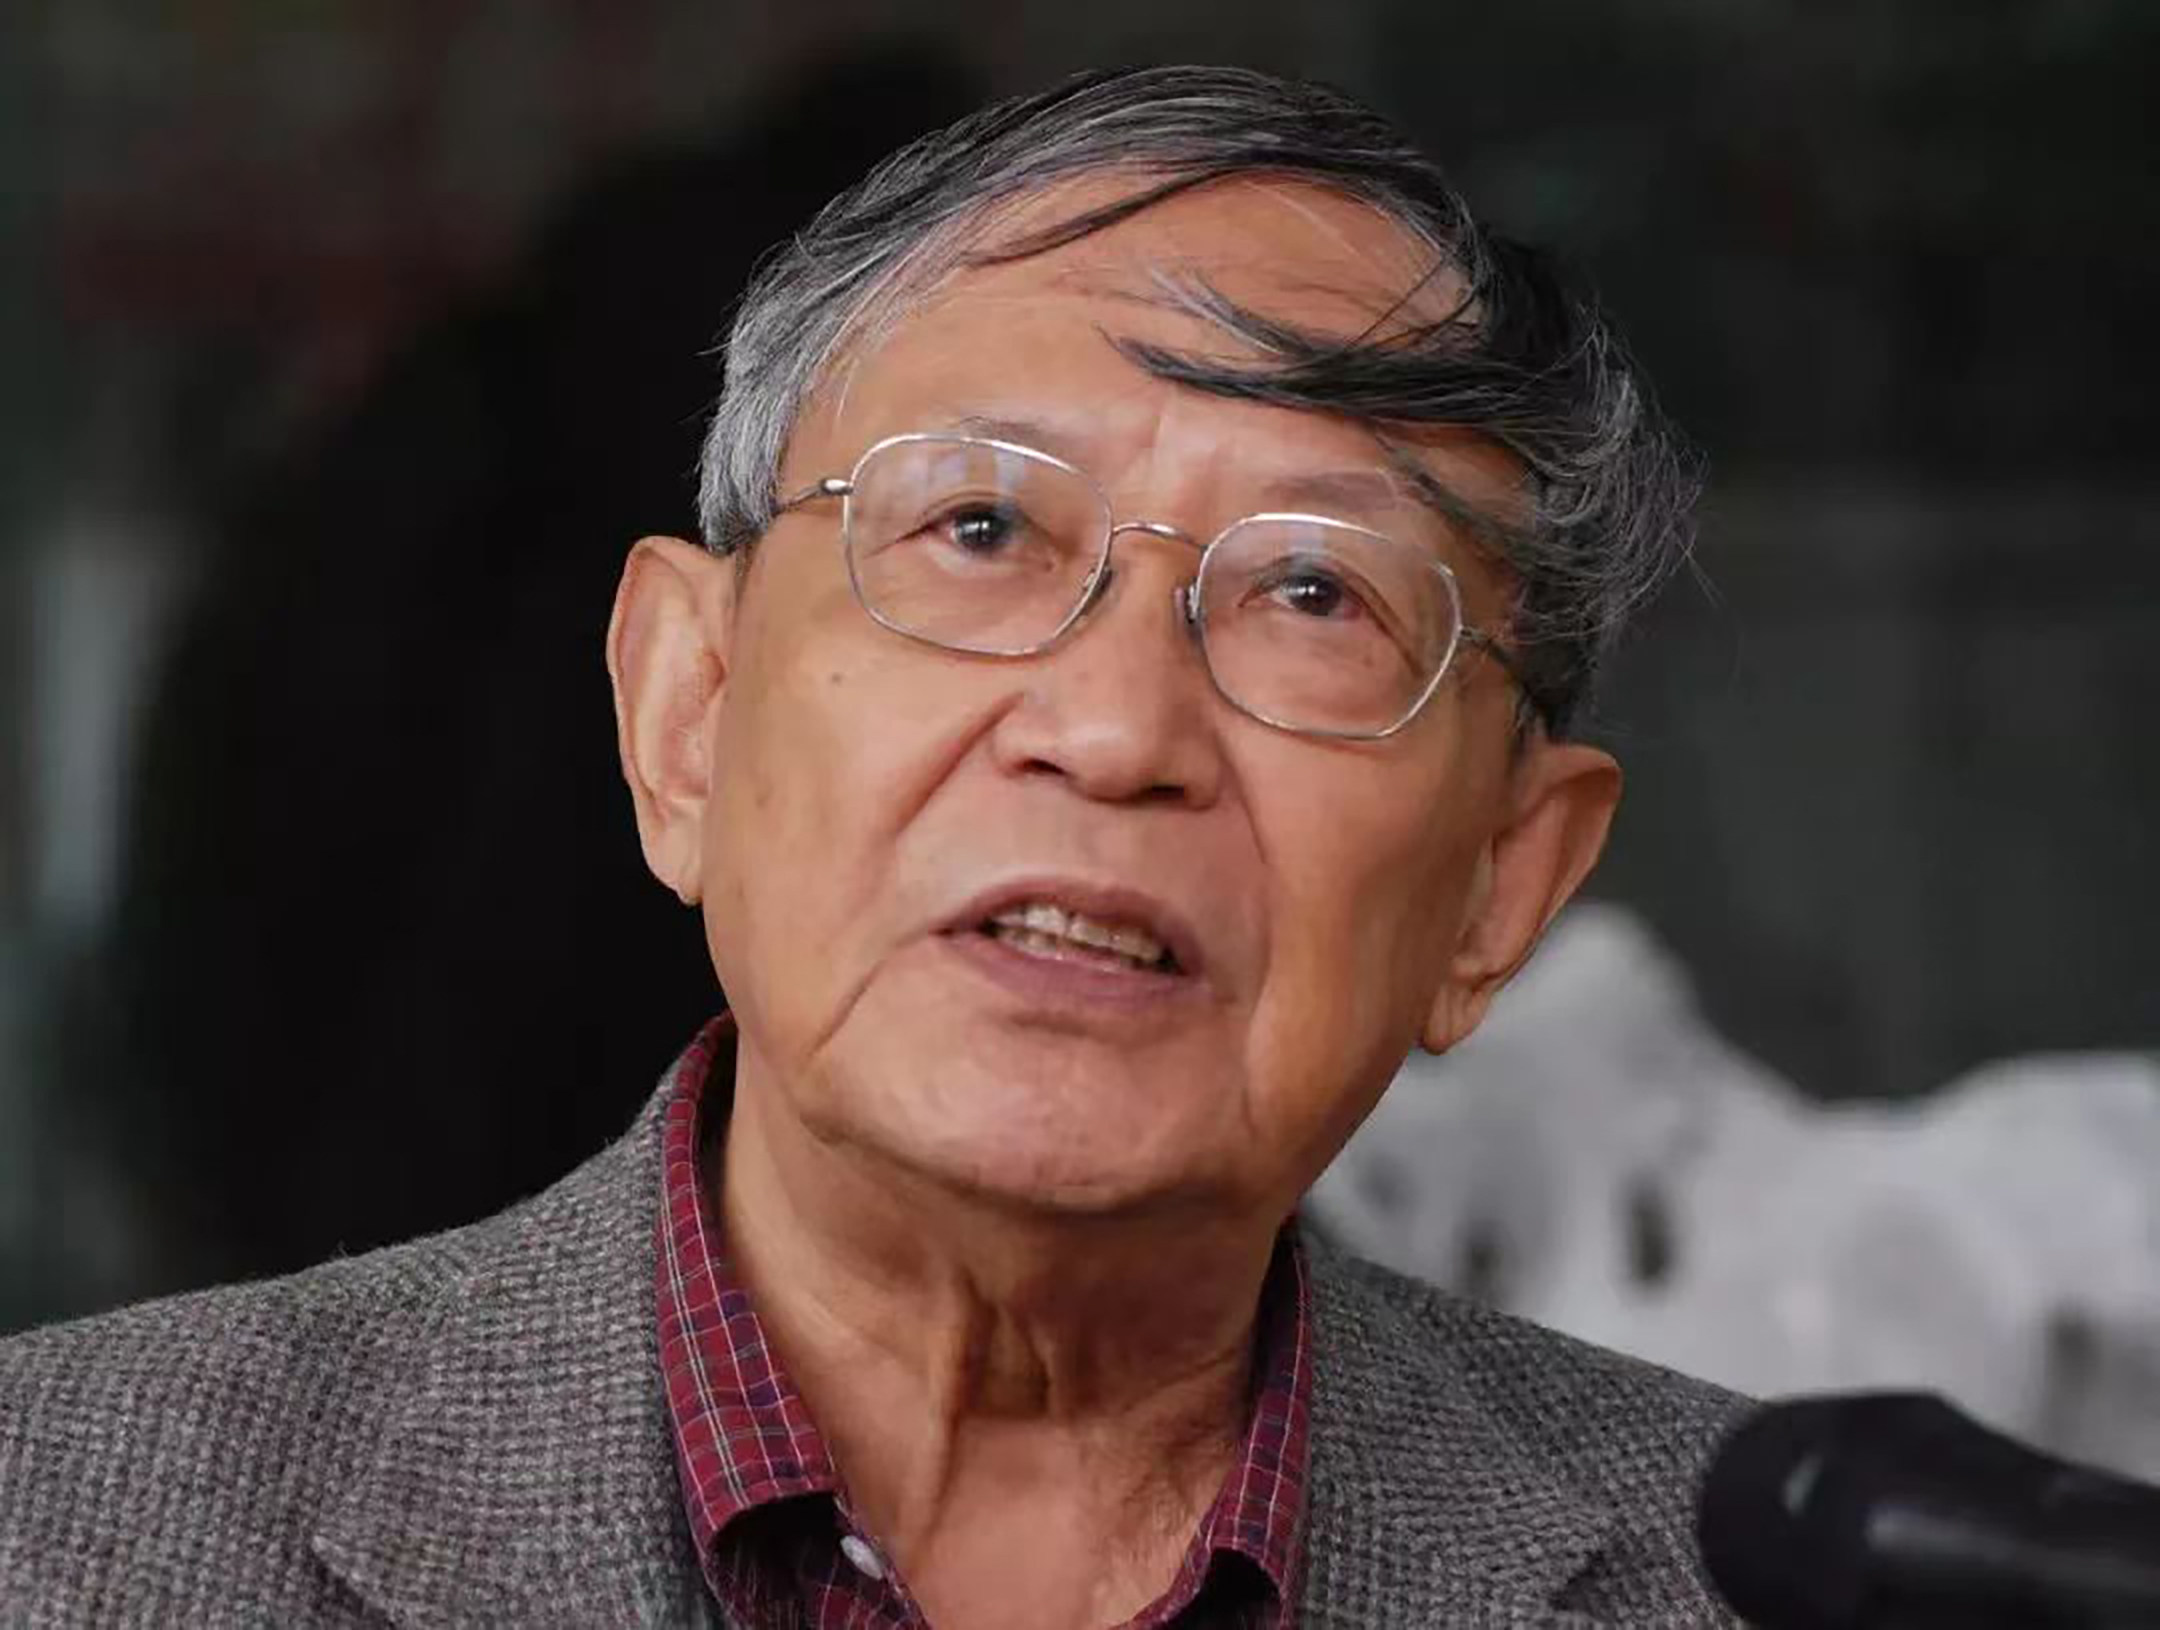 Li Zehou, along with other scholars, published an open letter sympathetic to student protesters during the 1989 pro-democracy demonstrations in Beijing, and his books were banned in mainland China as a result. Photo: Handout